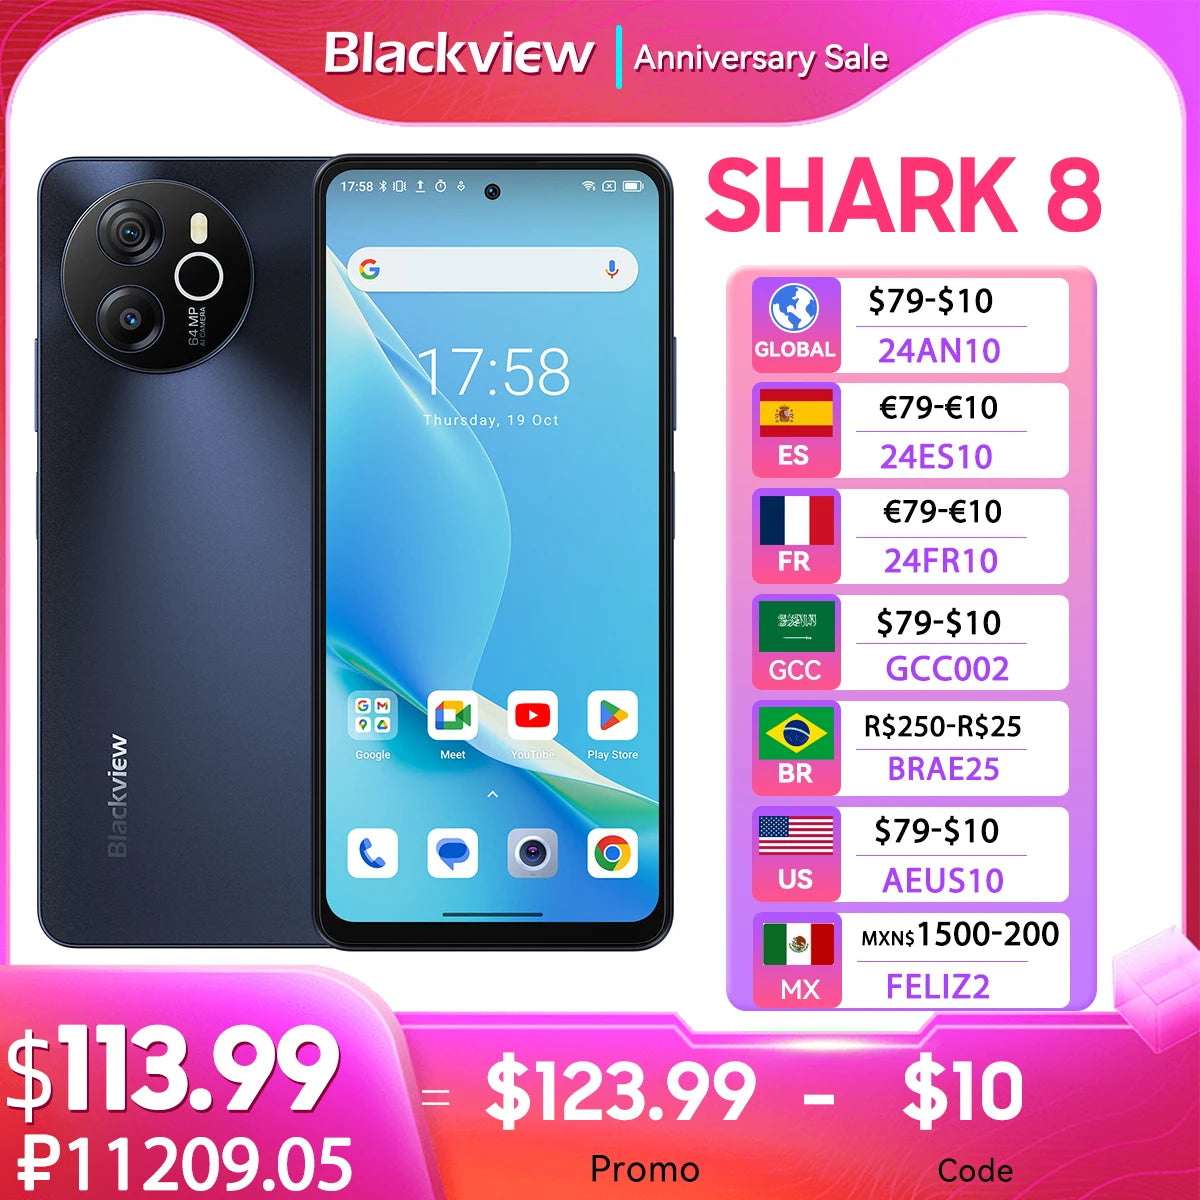 Blackview SHARK 8 Unlocked Smartphone - Ultimate Performance and Style  ourlum.com   